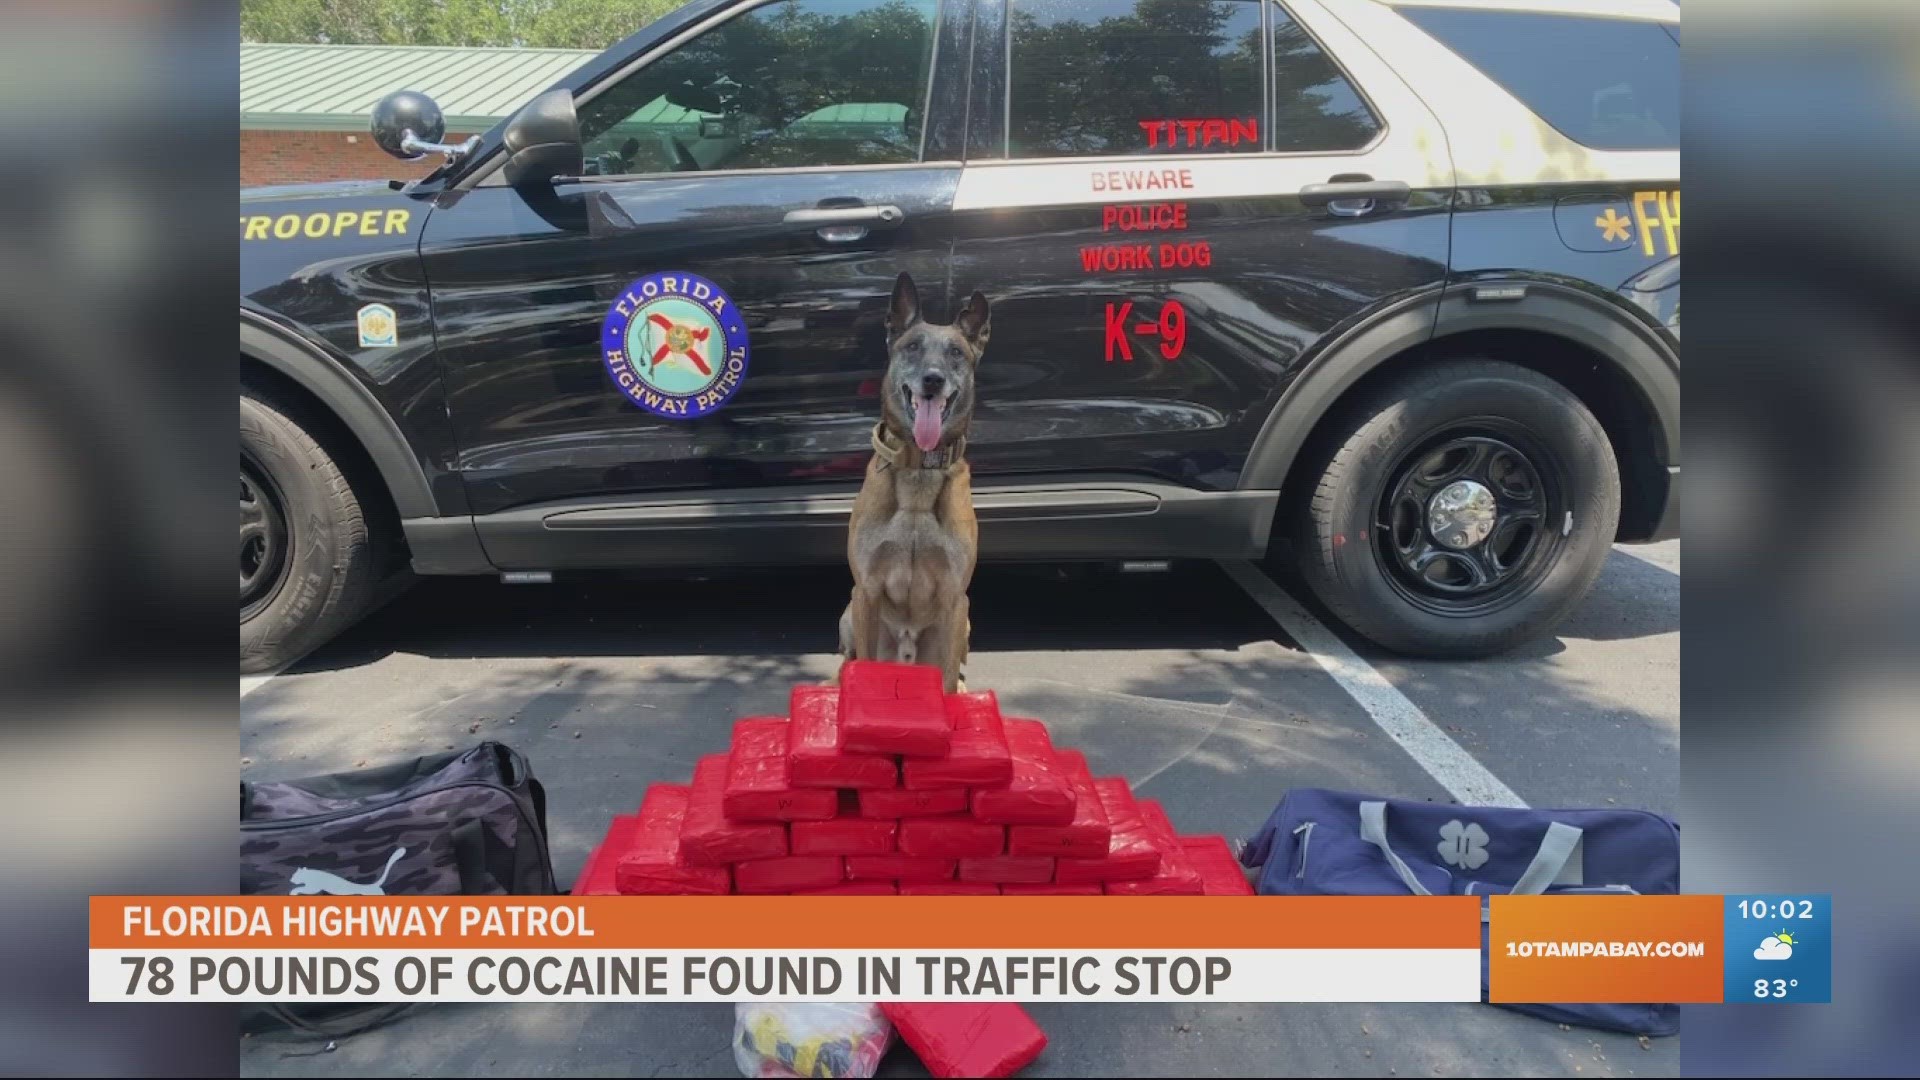 Two men were arrested after 78 pounds of cocaine, stacks of cash and marijuana were found during a traffic stop Friday afternoon in Tampa, according to Florida Highw